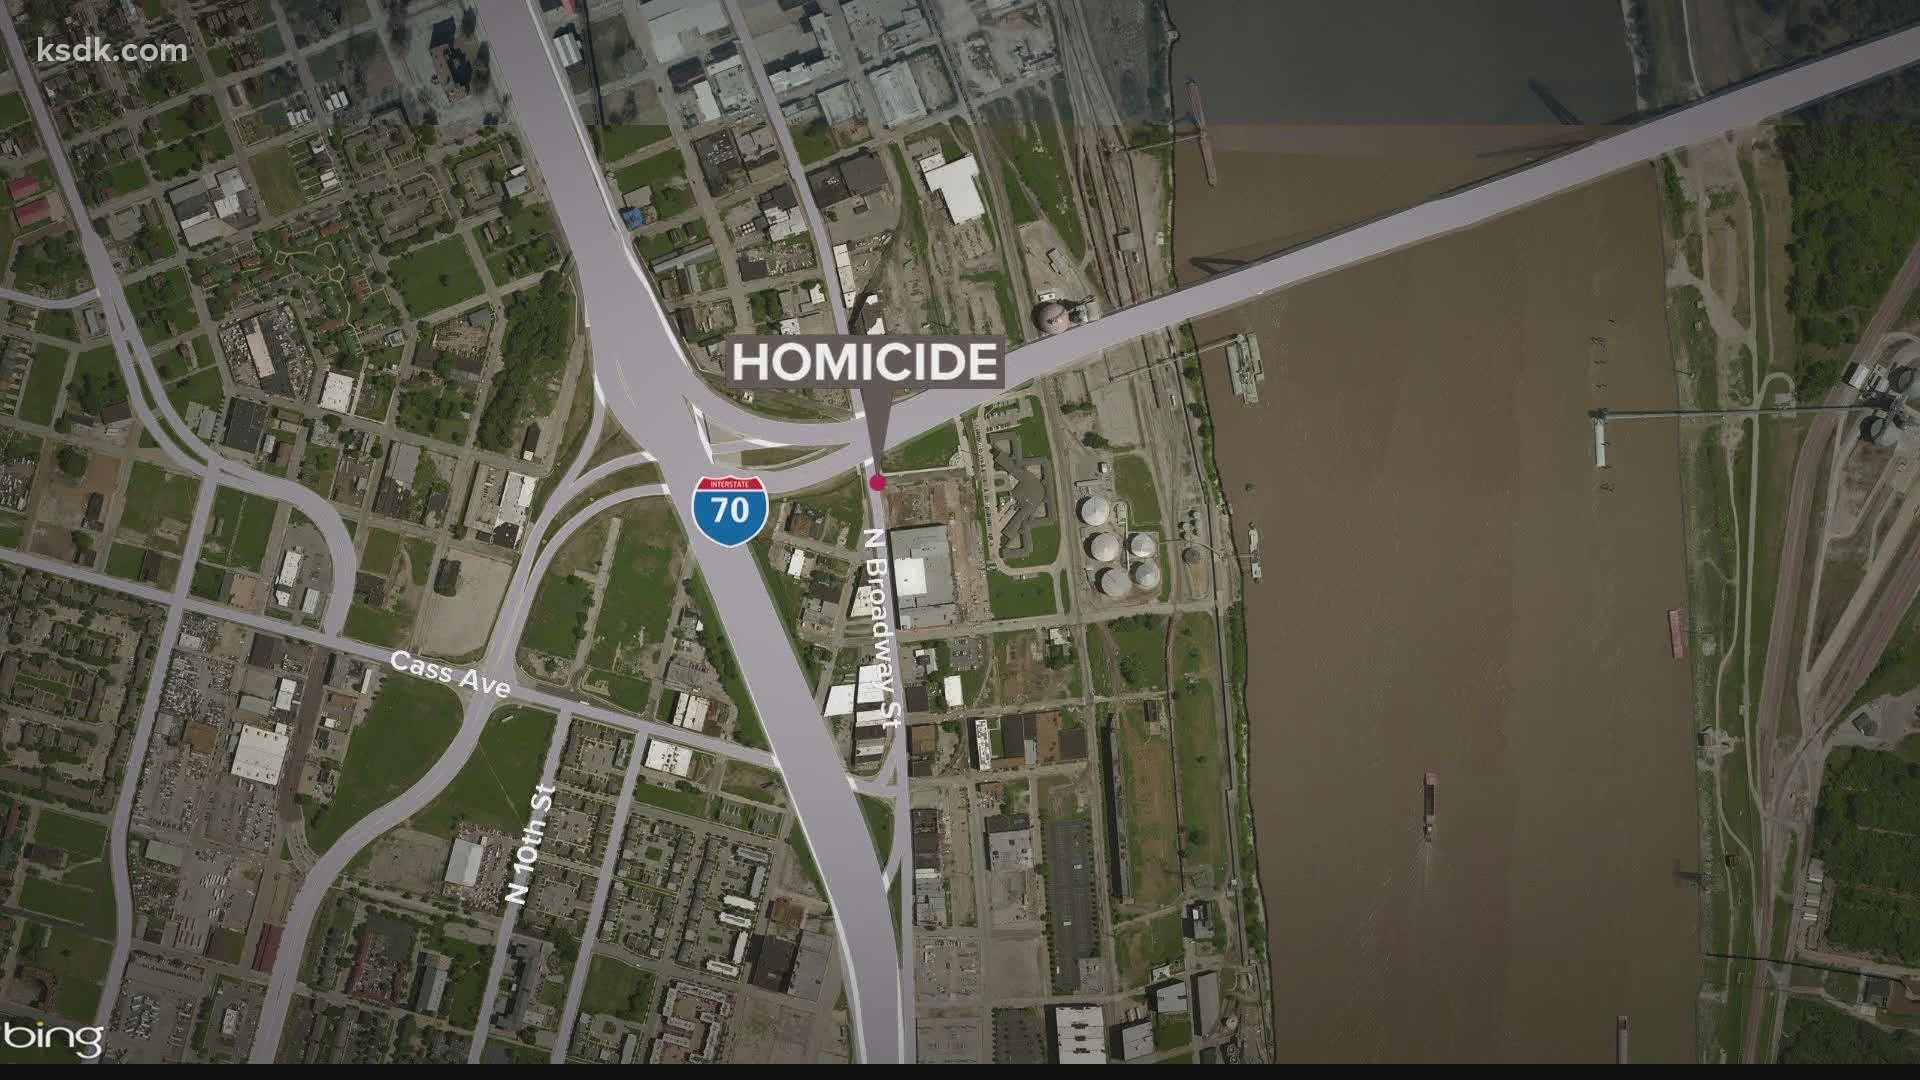 St. Louis has seen a nearly 25% increase in the number of homicides over the same period in 2019